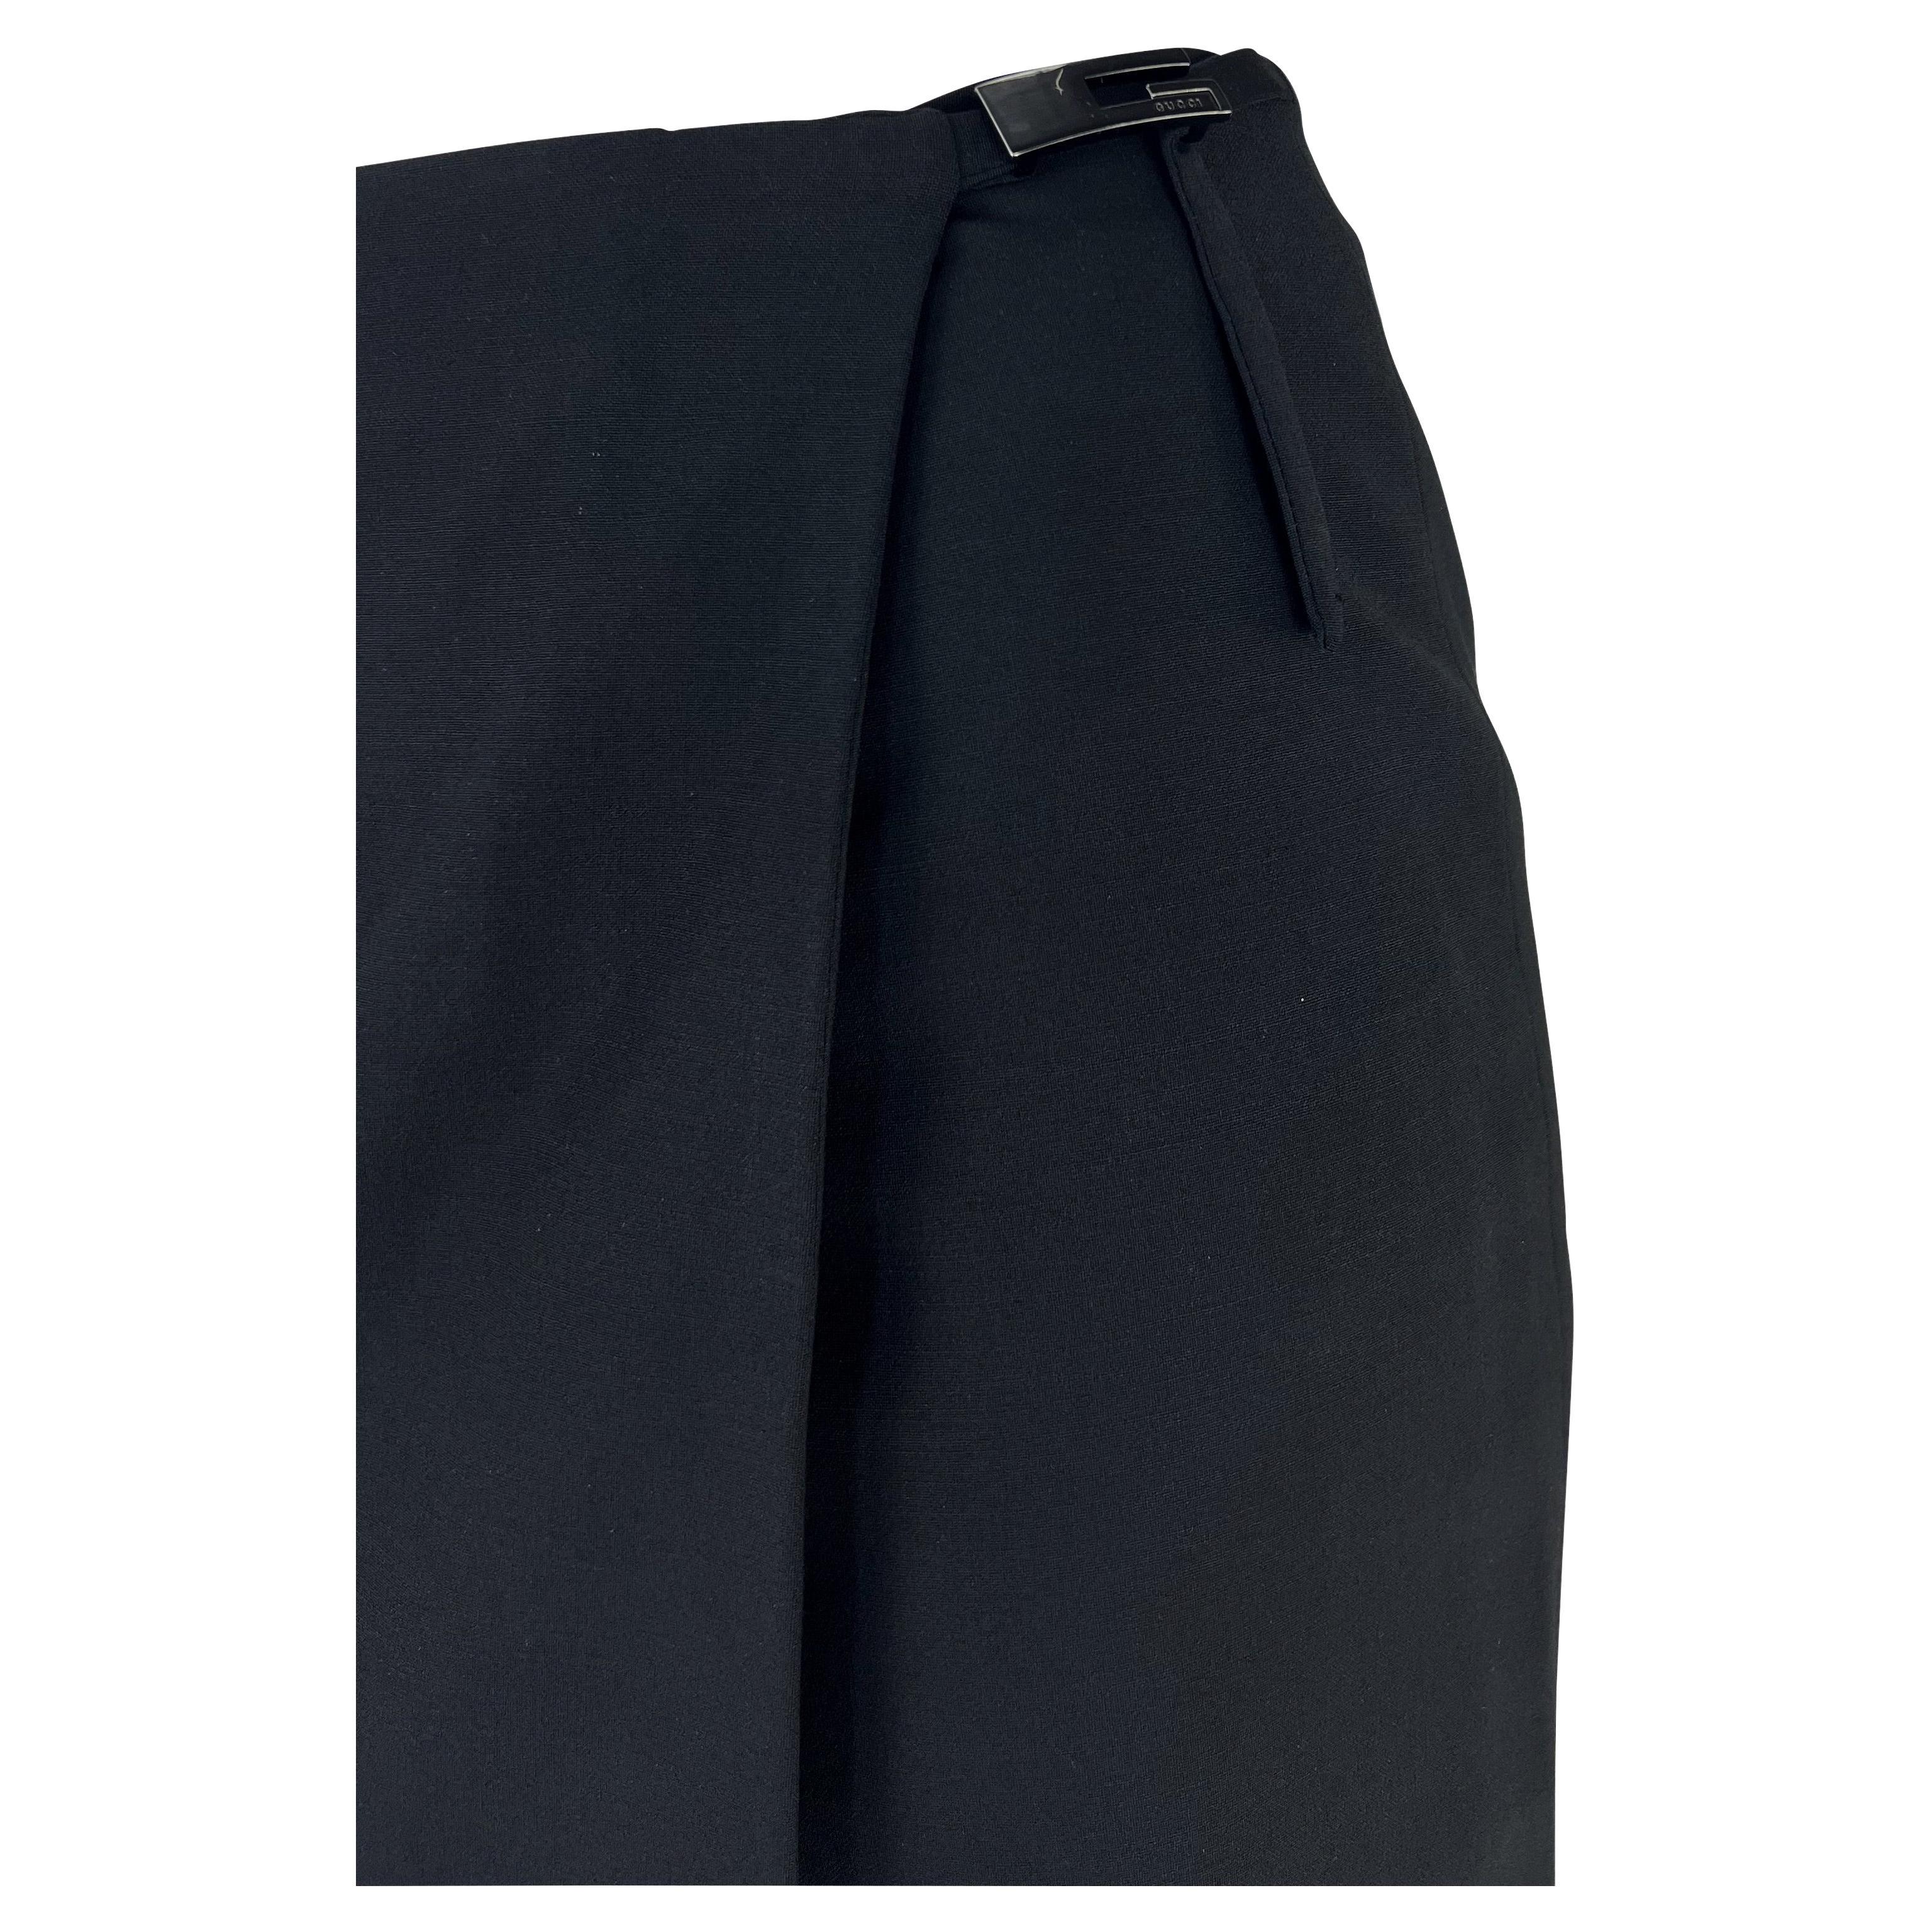 Presenting a fabulous black Gucci skirt, designed by Tom Ford. From 1998, this wrap skirt features the season's famous square 'G' Gucci buckle at the hip that is secured with a strand of fabric. Similar to the 1997 Gucci wrap skirt seen on the